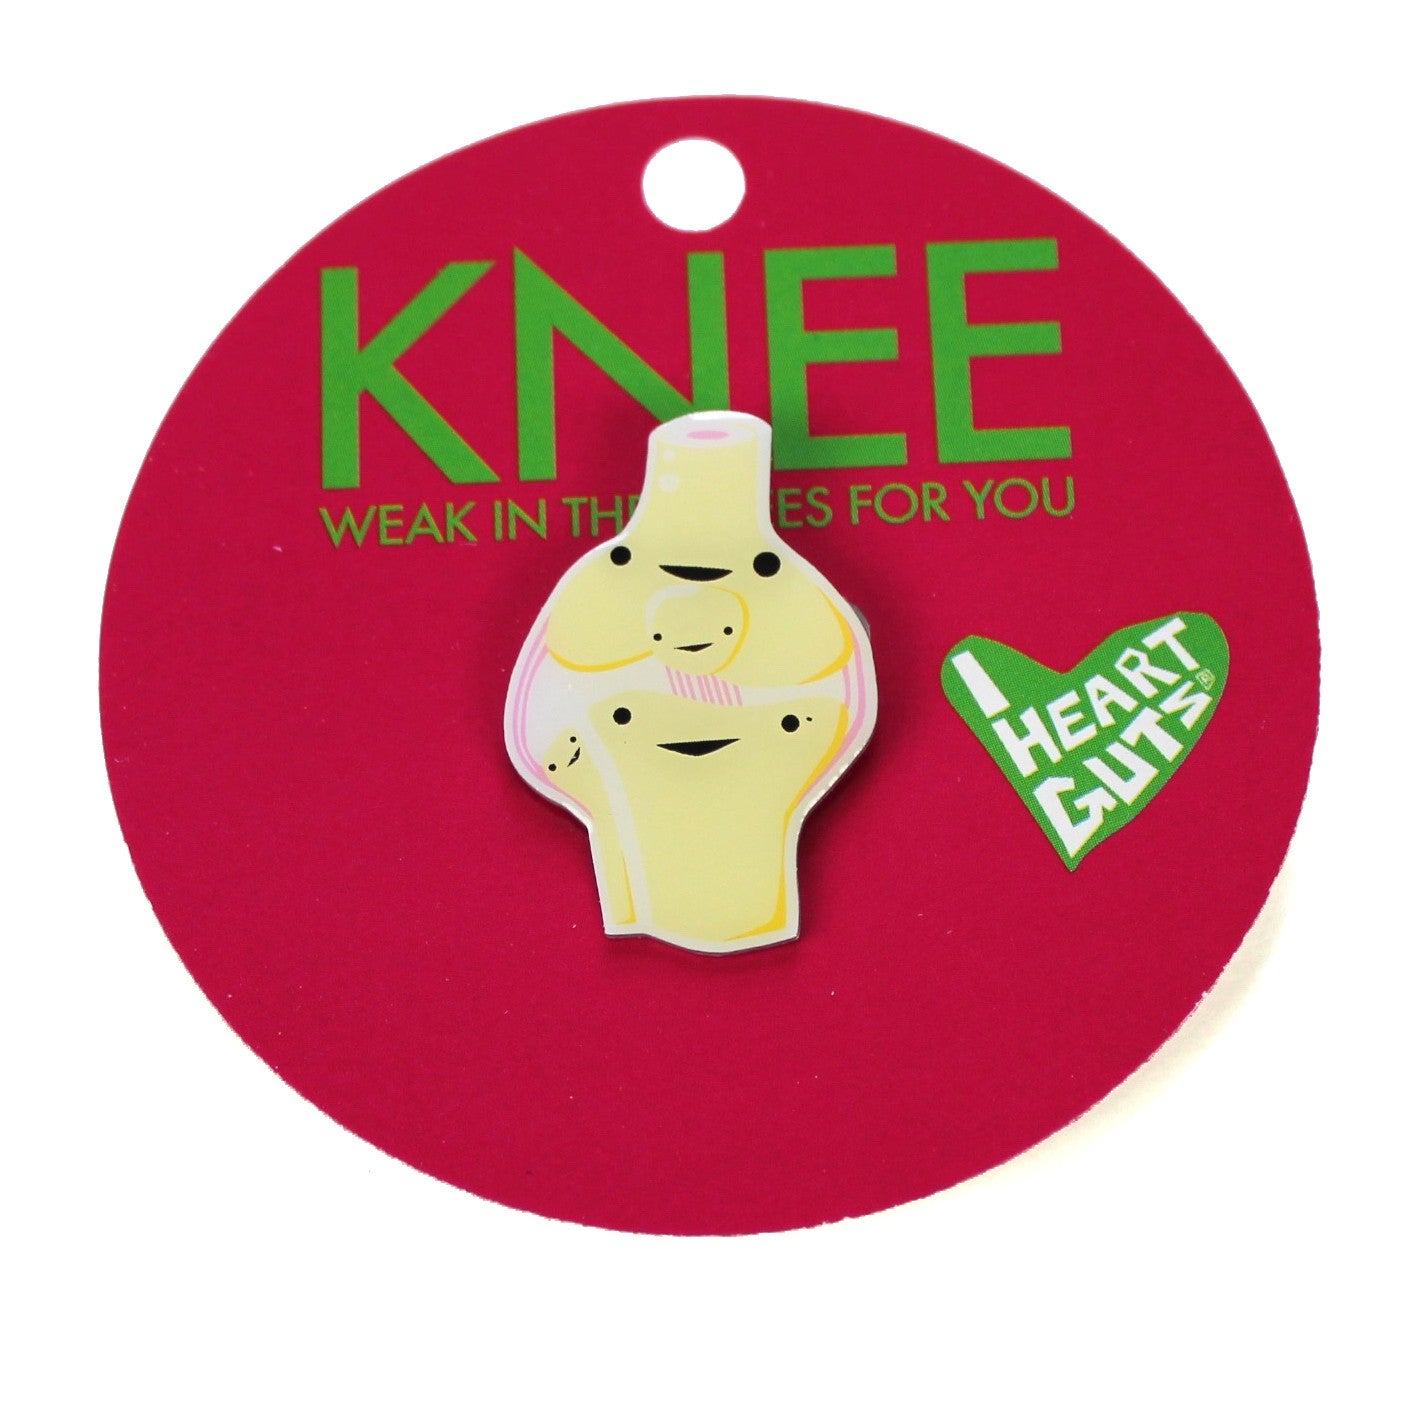 A red card with "Knee Weak in the Knees for You" written on it in green letters. There is a cream enamel pin in the shape of a knee with faces on the different sections.